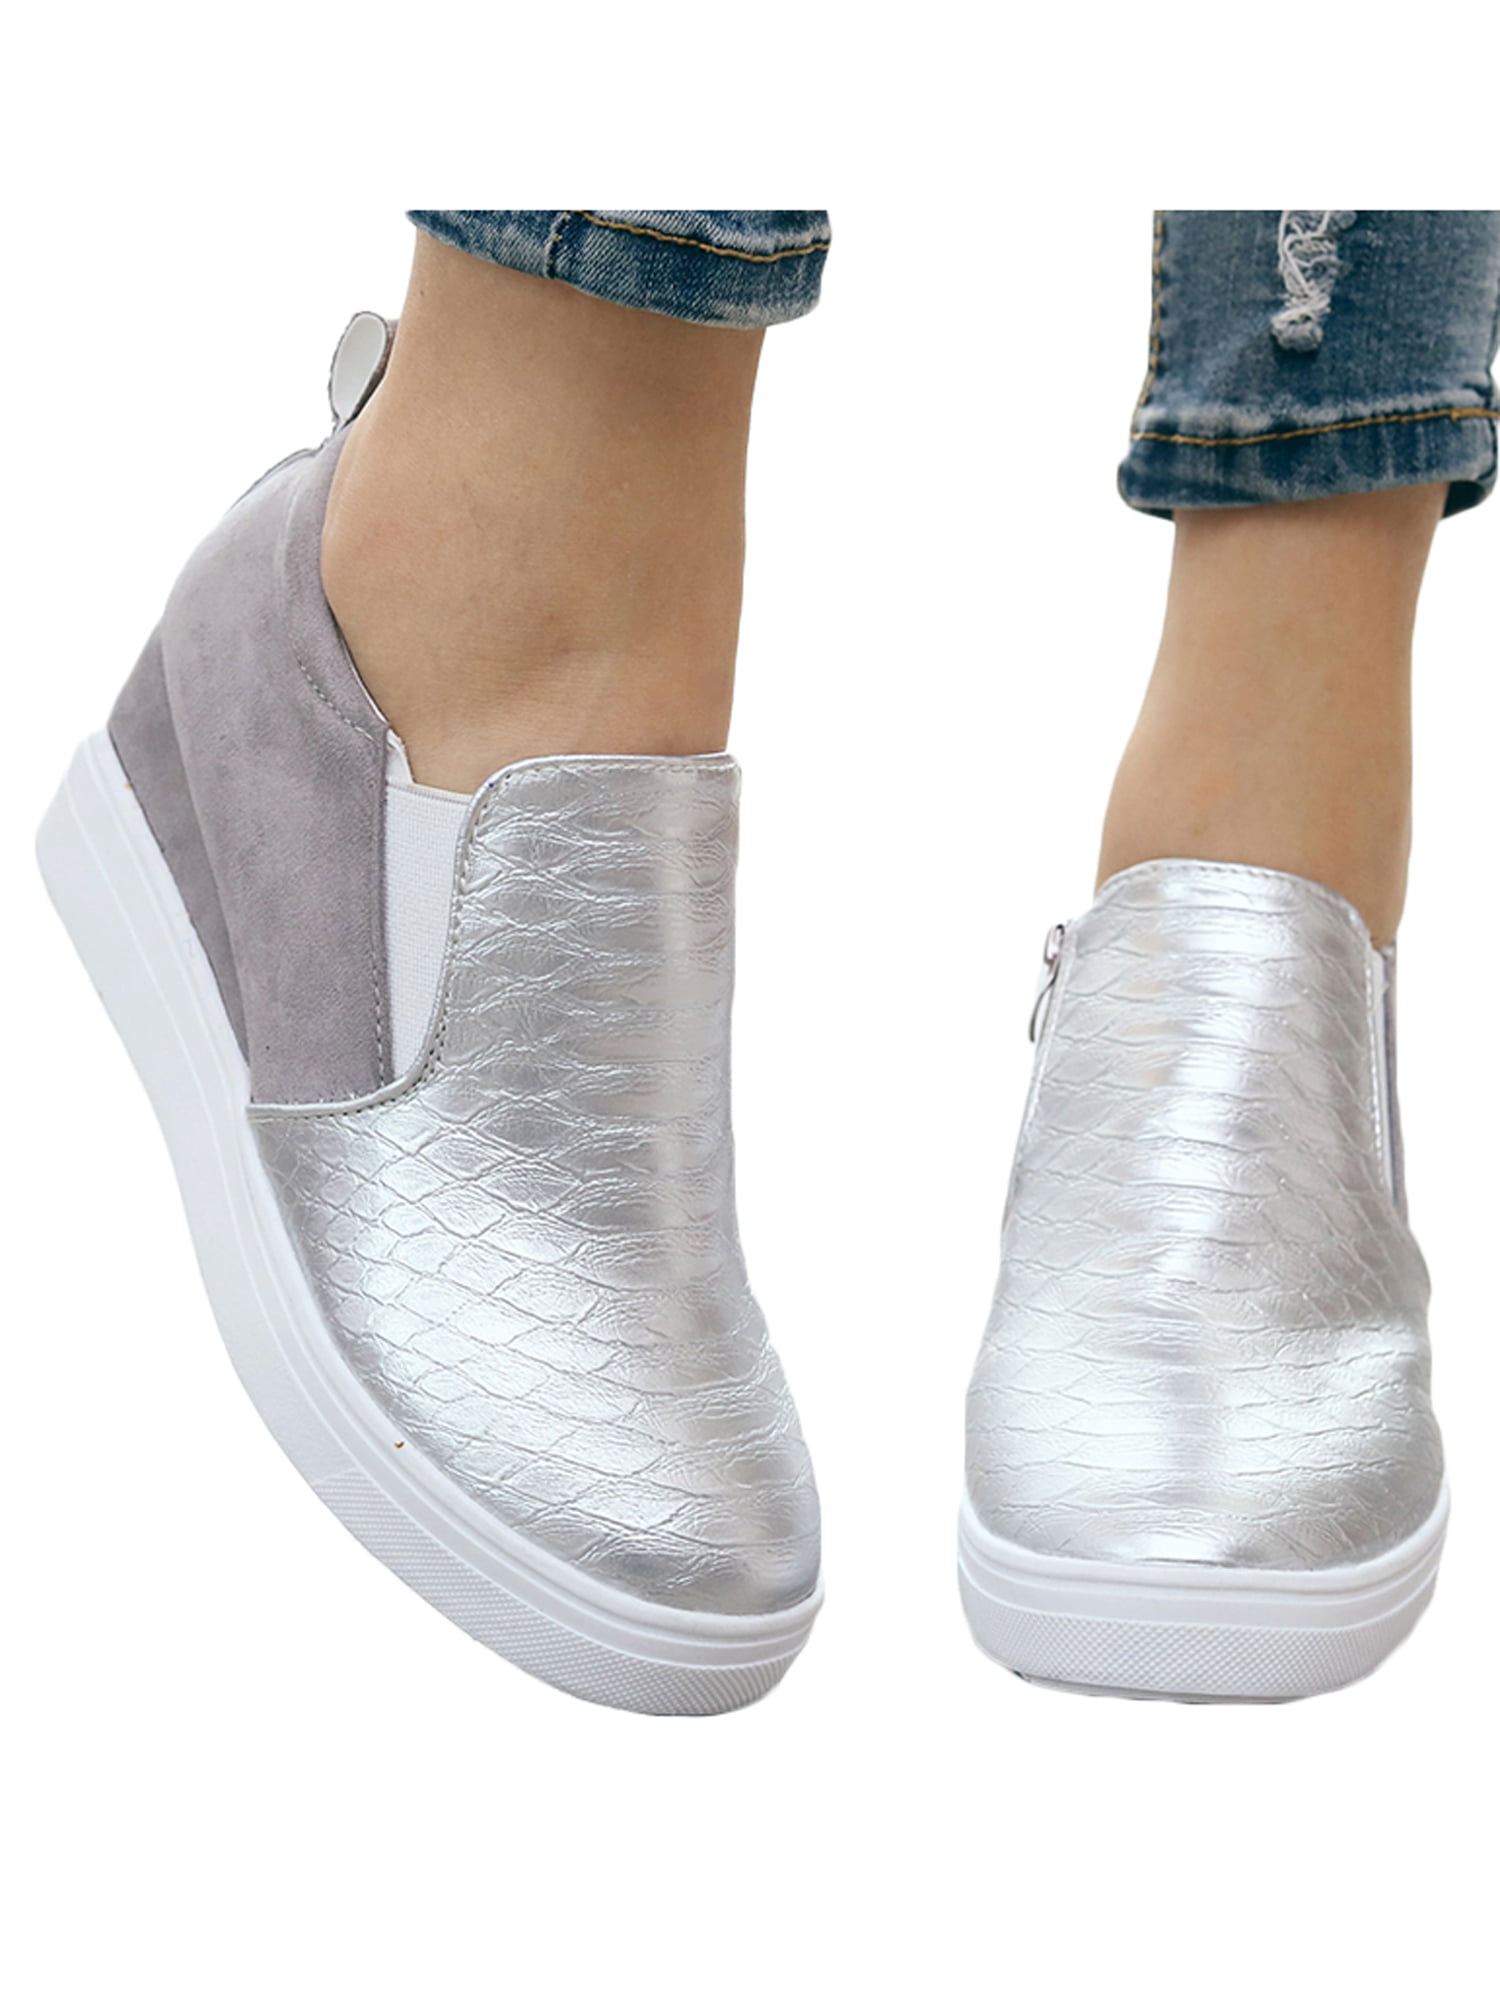 slip on wedge shoes